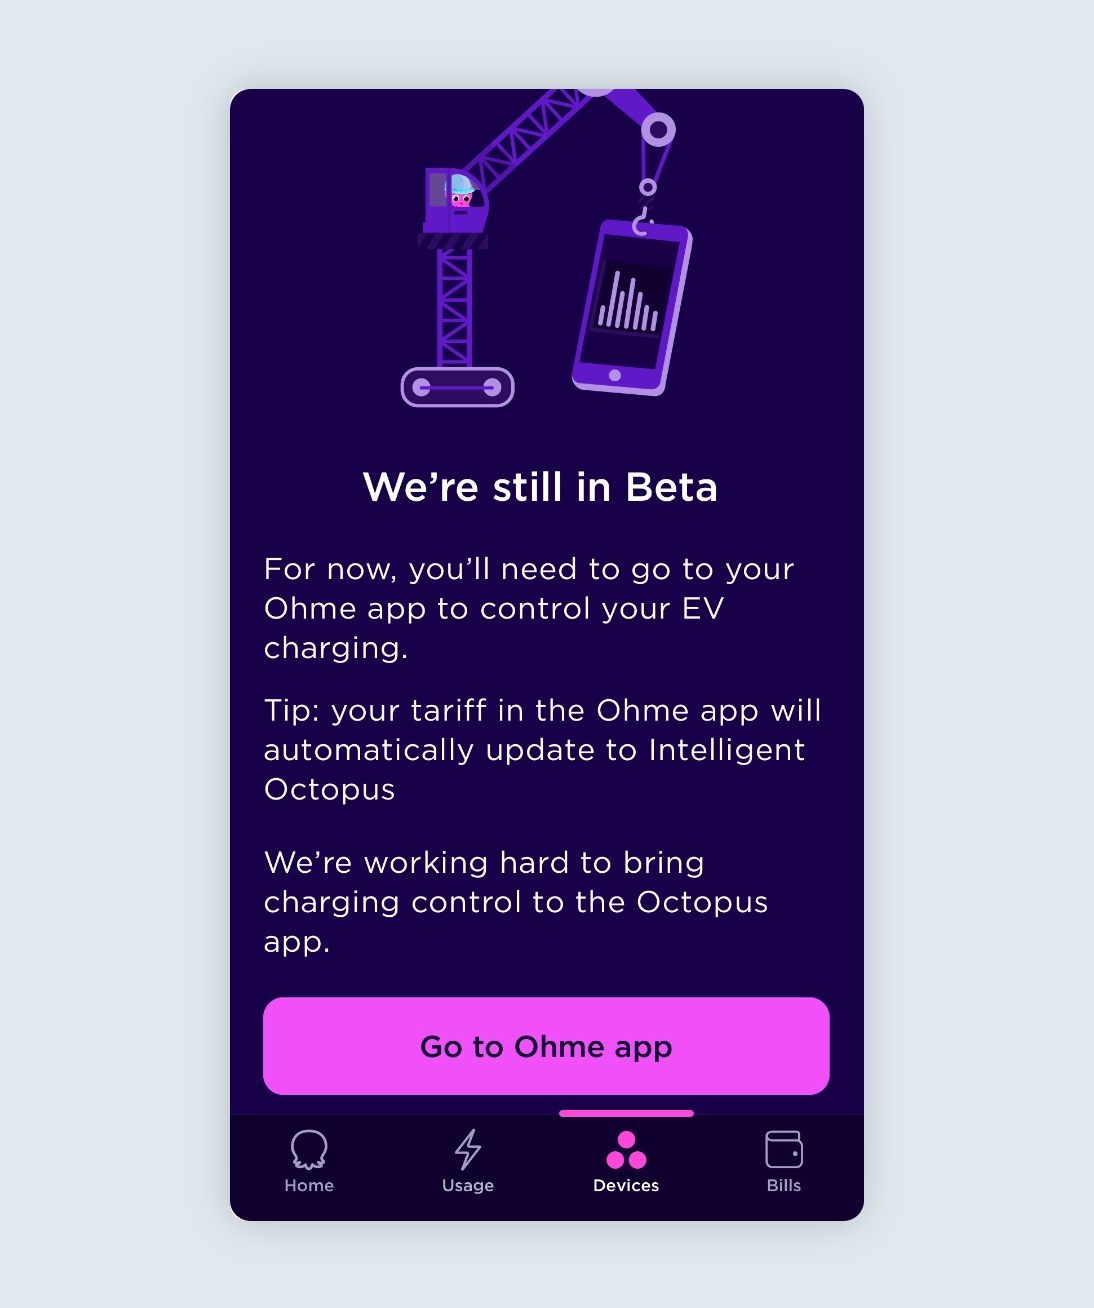 Octopus Energy app devices tab with button to open the Ohme app